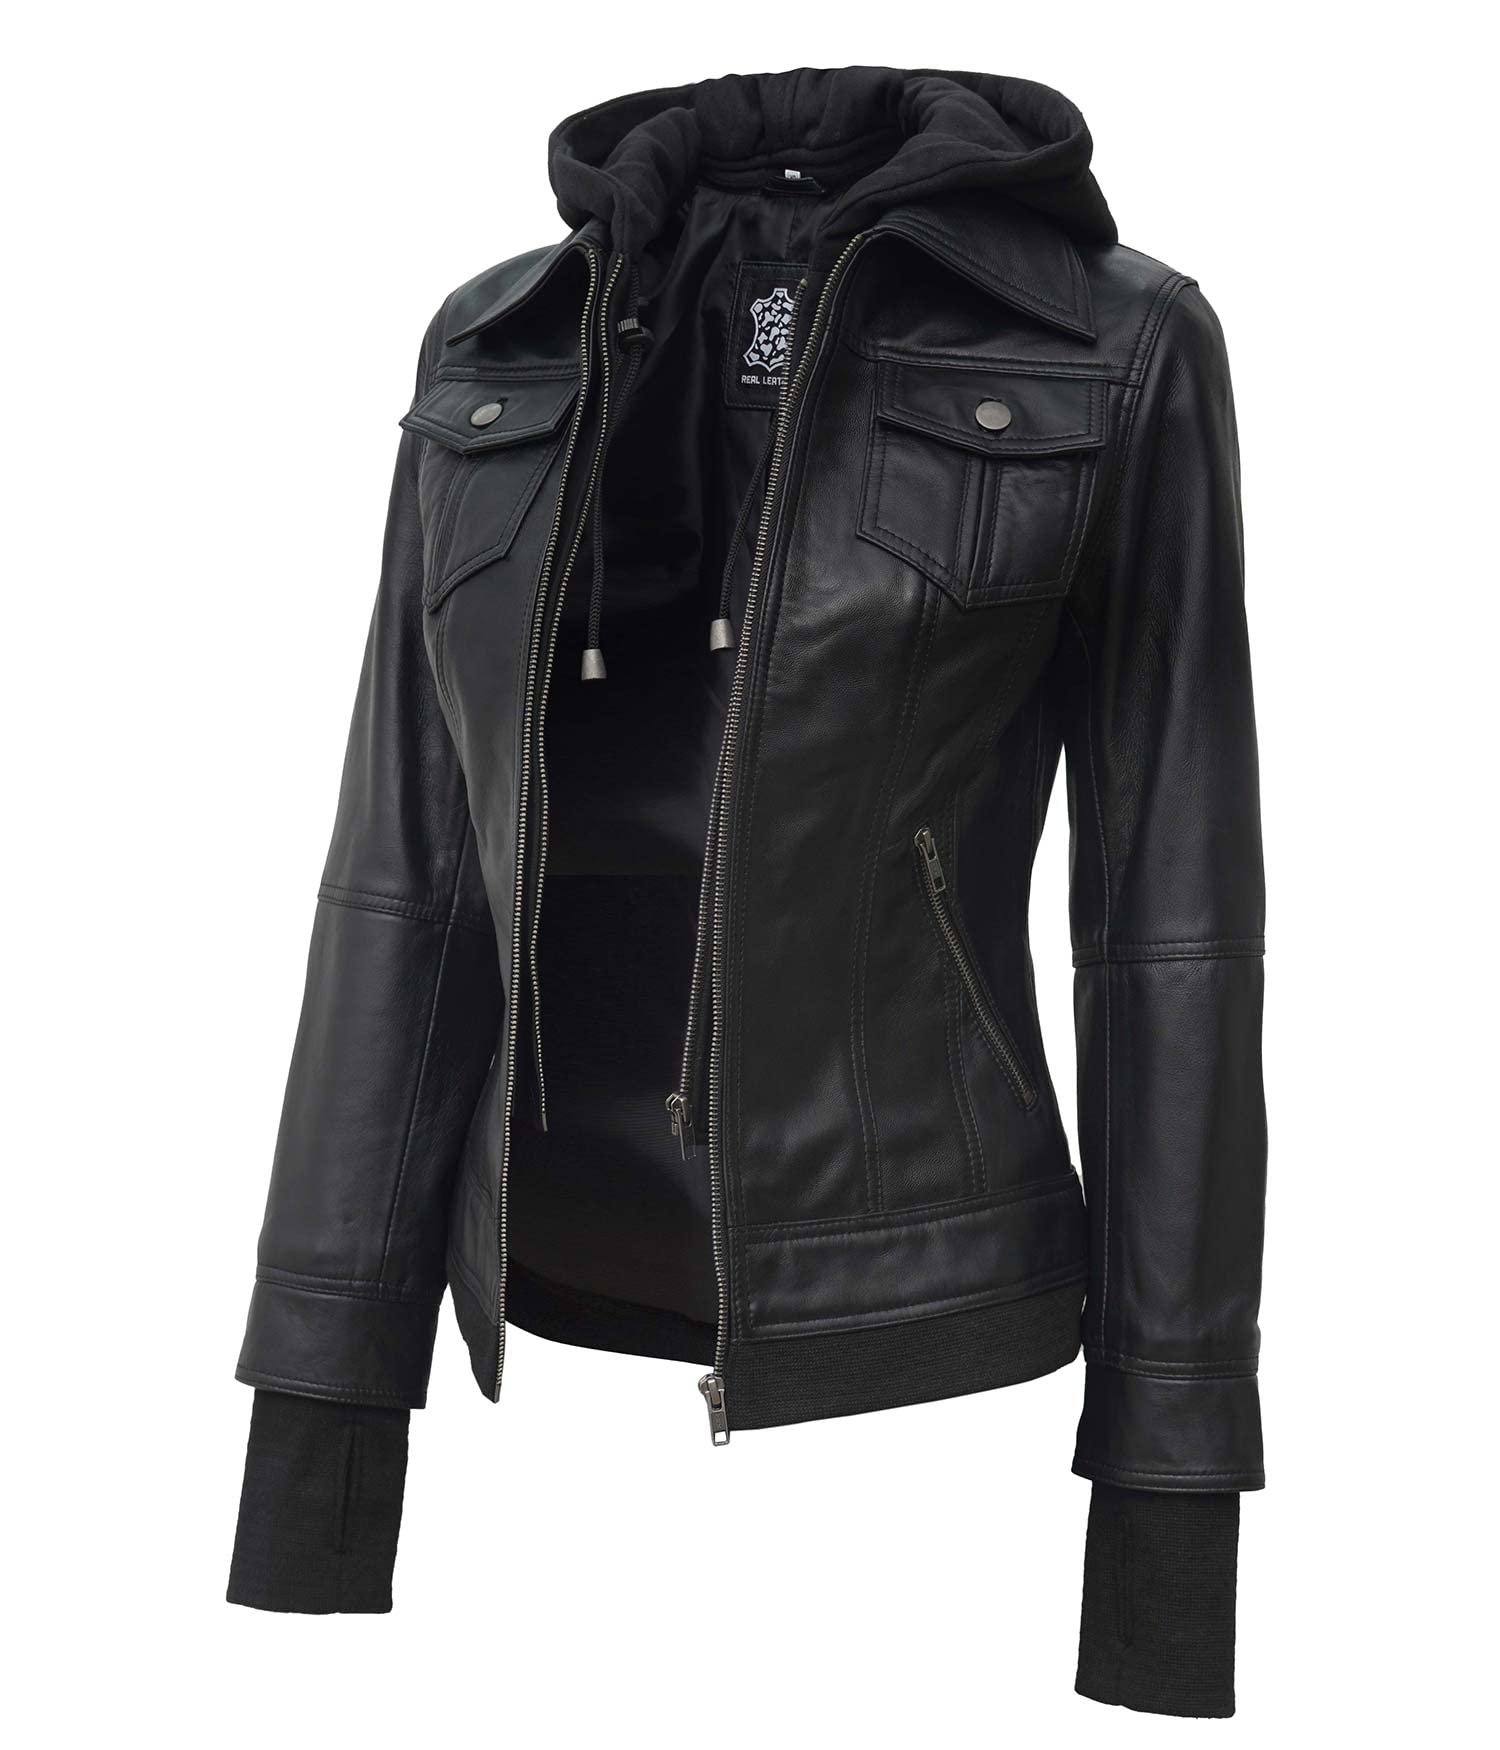 Hooded Leather Jacket Women - Real Lambskin Womens Leather Jacket with Hood